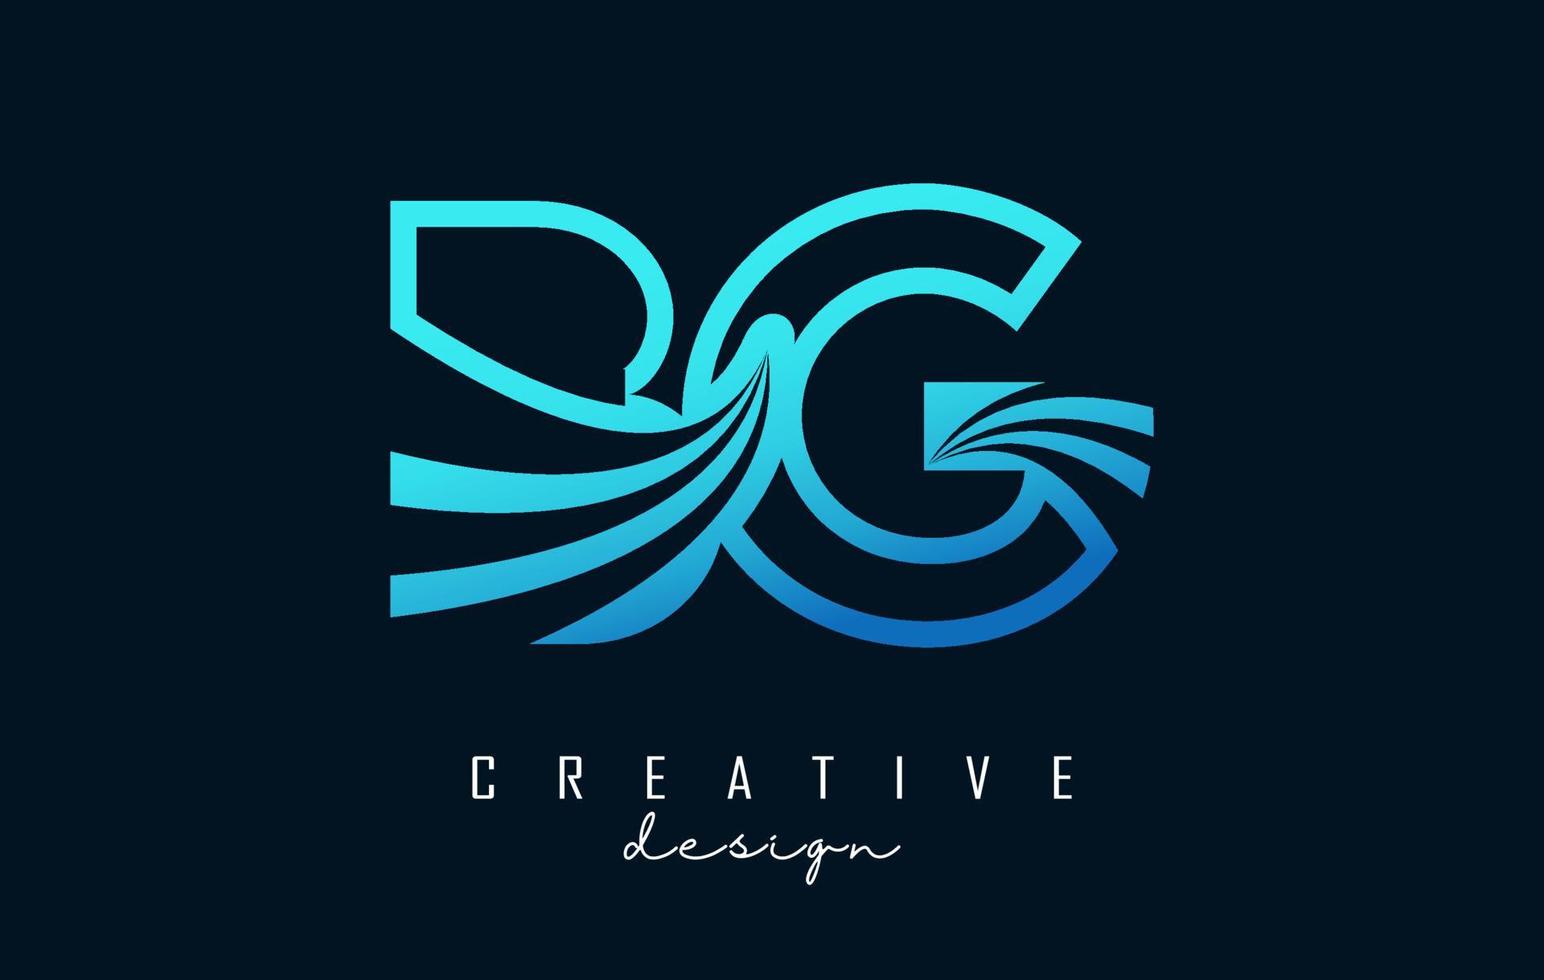 Outline blue letters BG b g logo with leading lines and road concept design. Letters with geometric design. vector